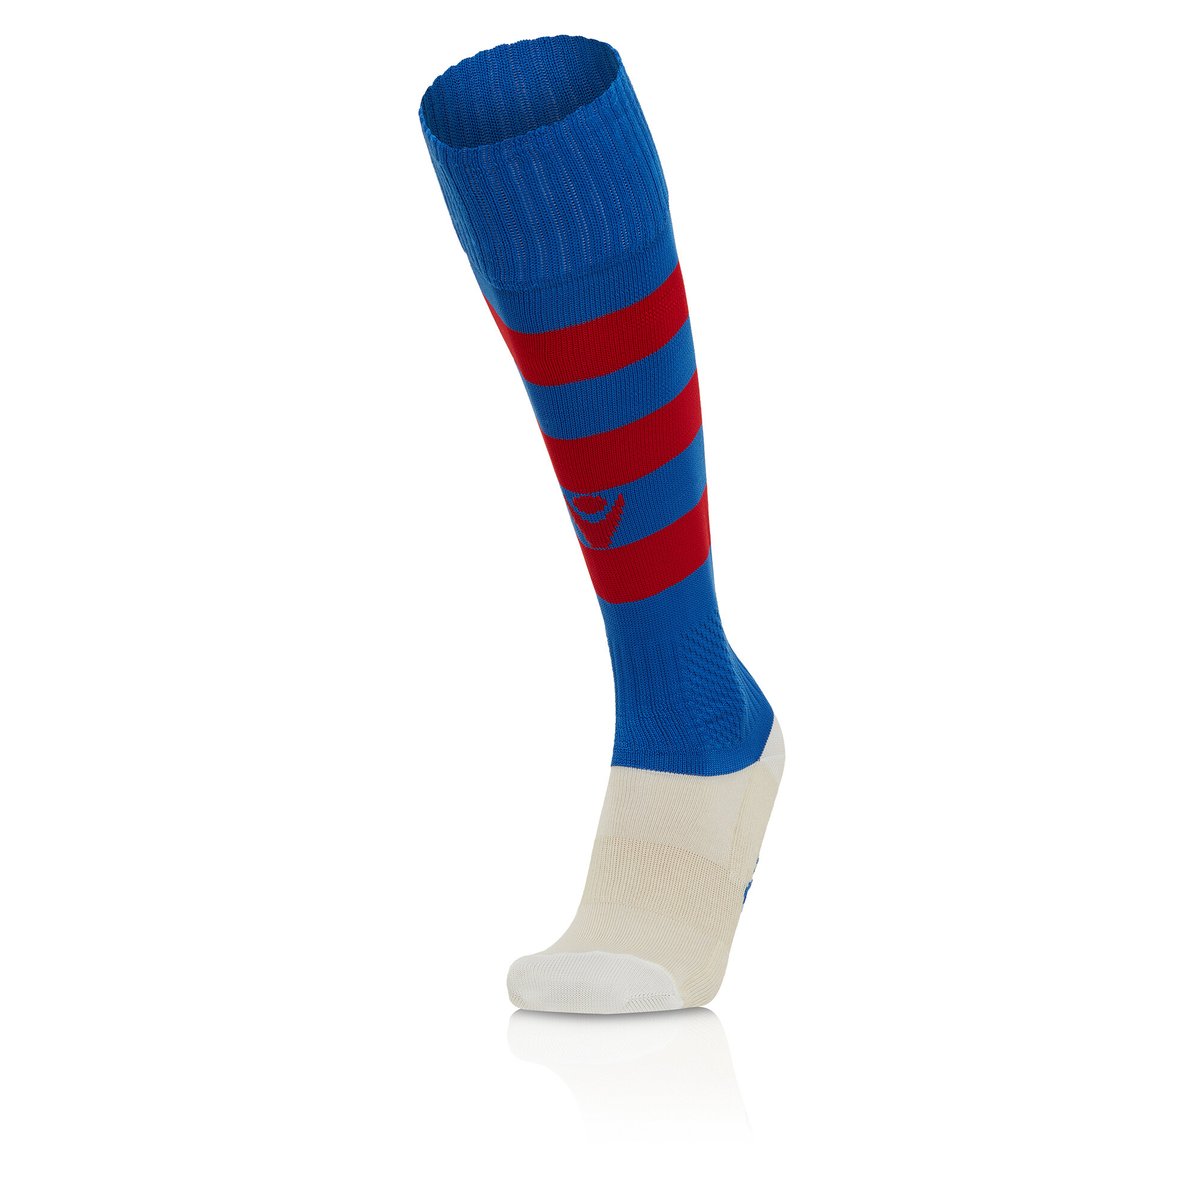 Macron Hoops Match Sock - Royal Blue/Red (Pack of 5)